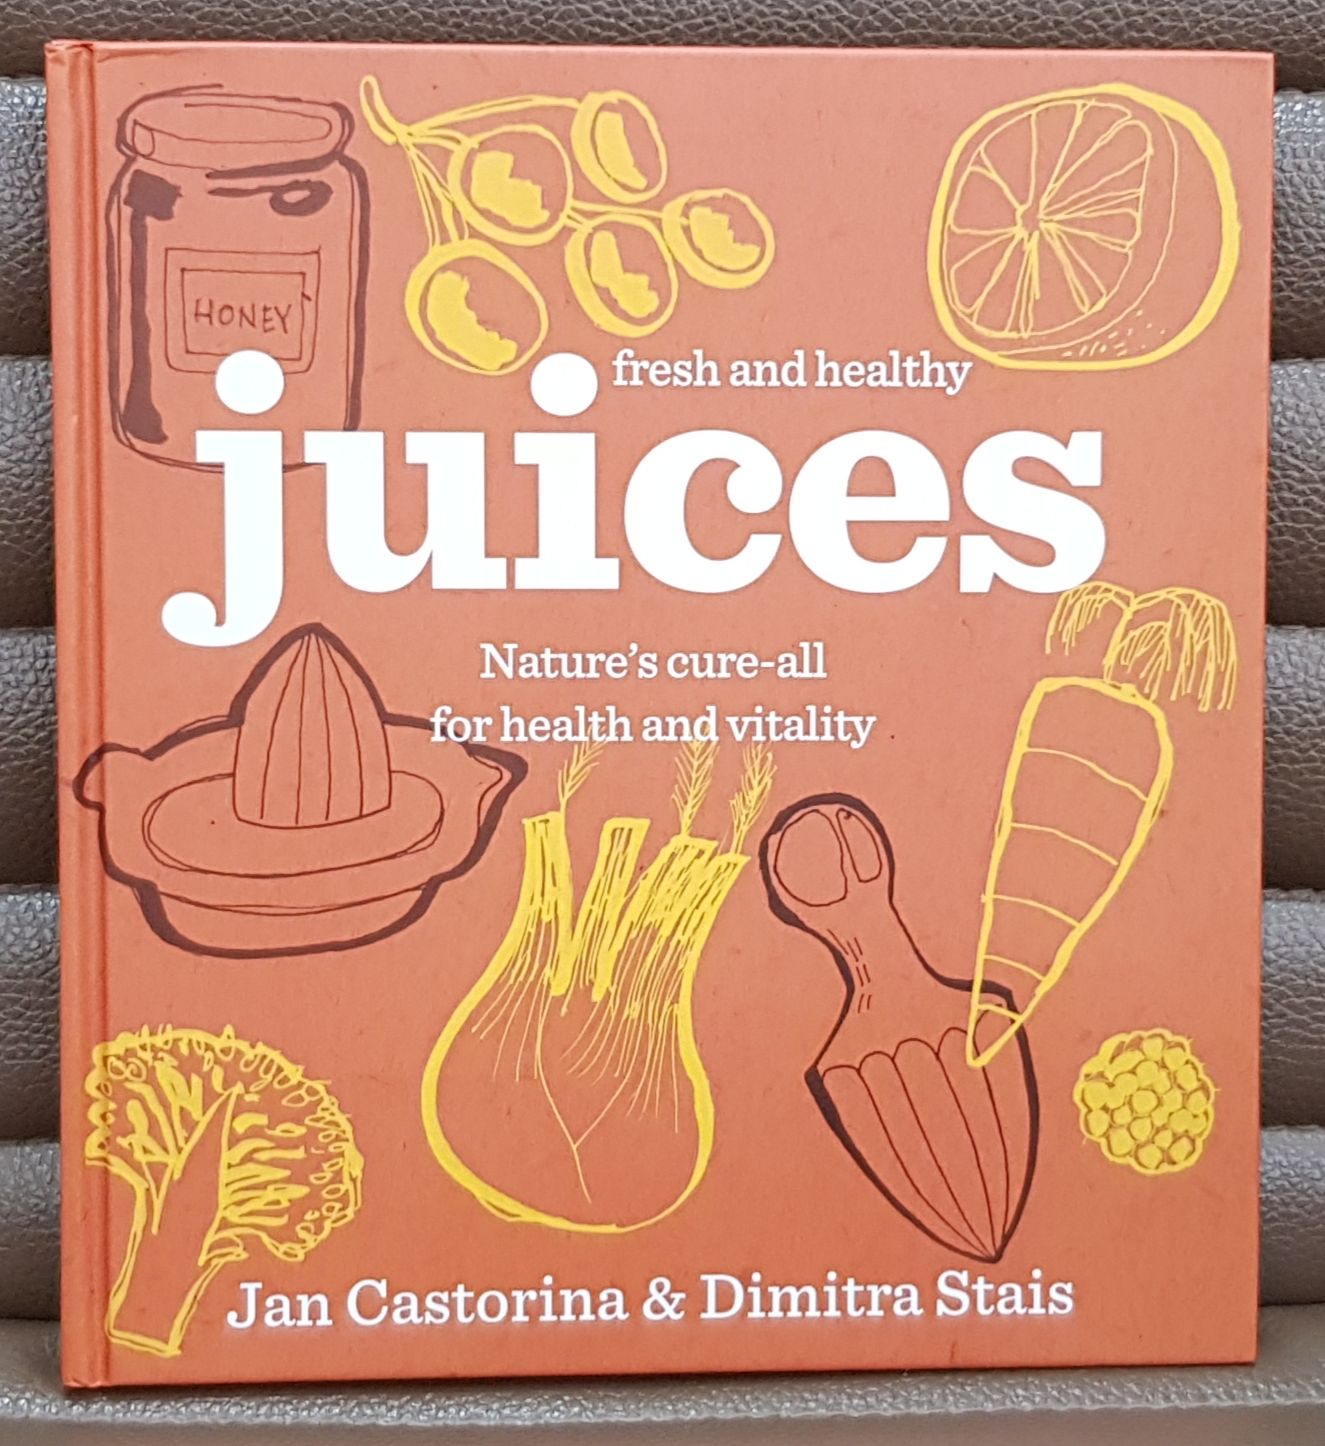 Fresh ans healthy juices nature's cure-all for health and vitality